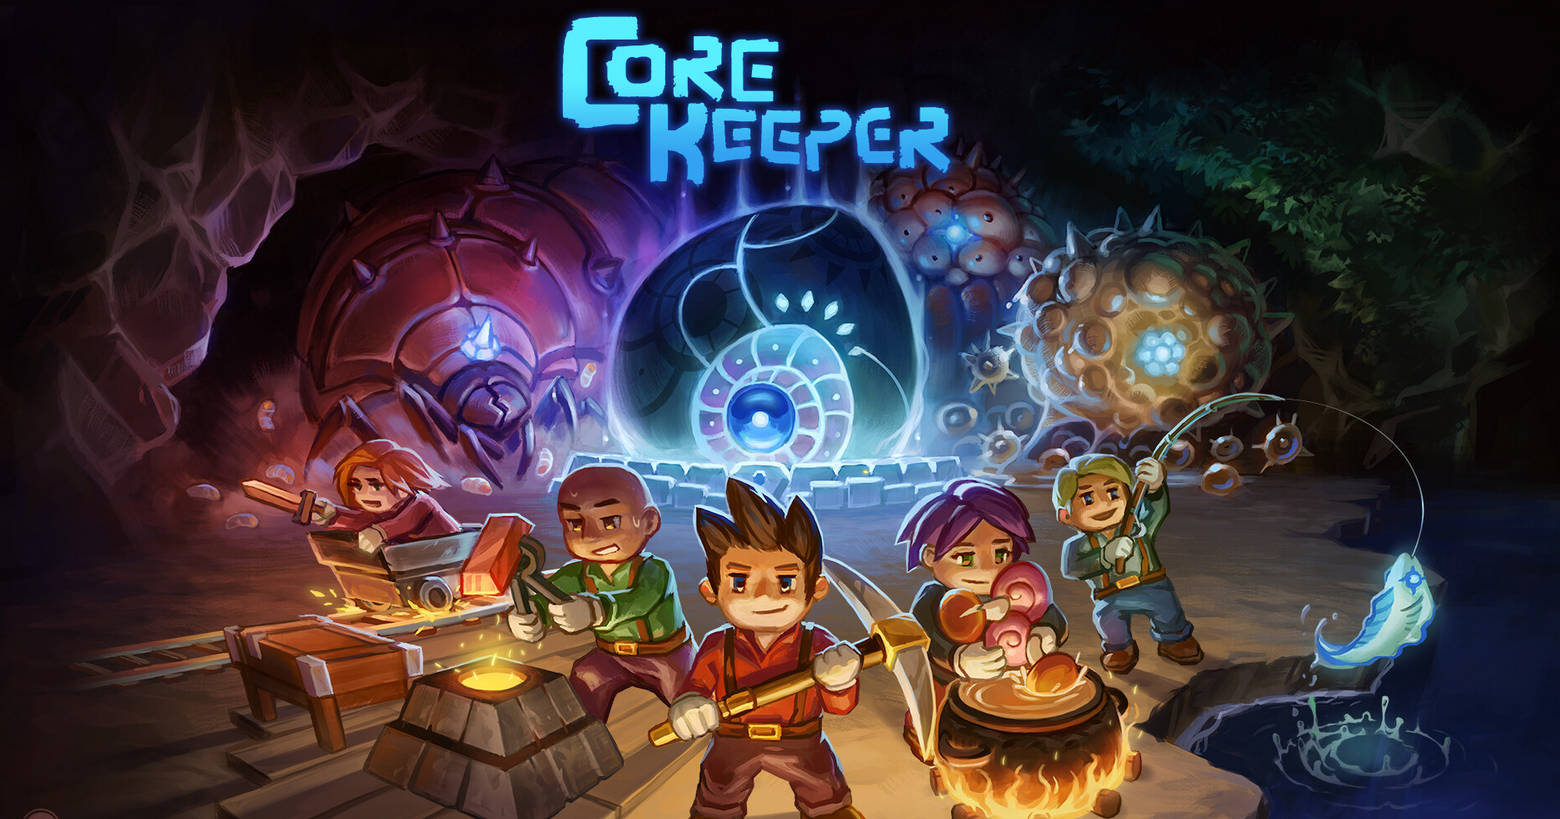 On this cover, we see the different characters in Core Keeper. Find helpful tips and tricks in our guide and defeat bosses like Azeos the Sky Titan.